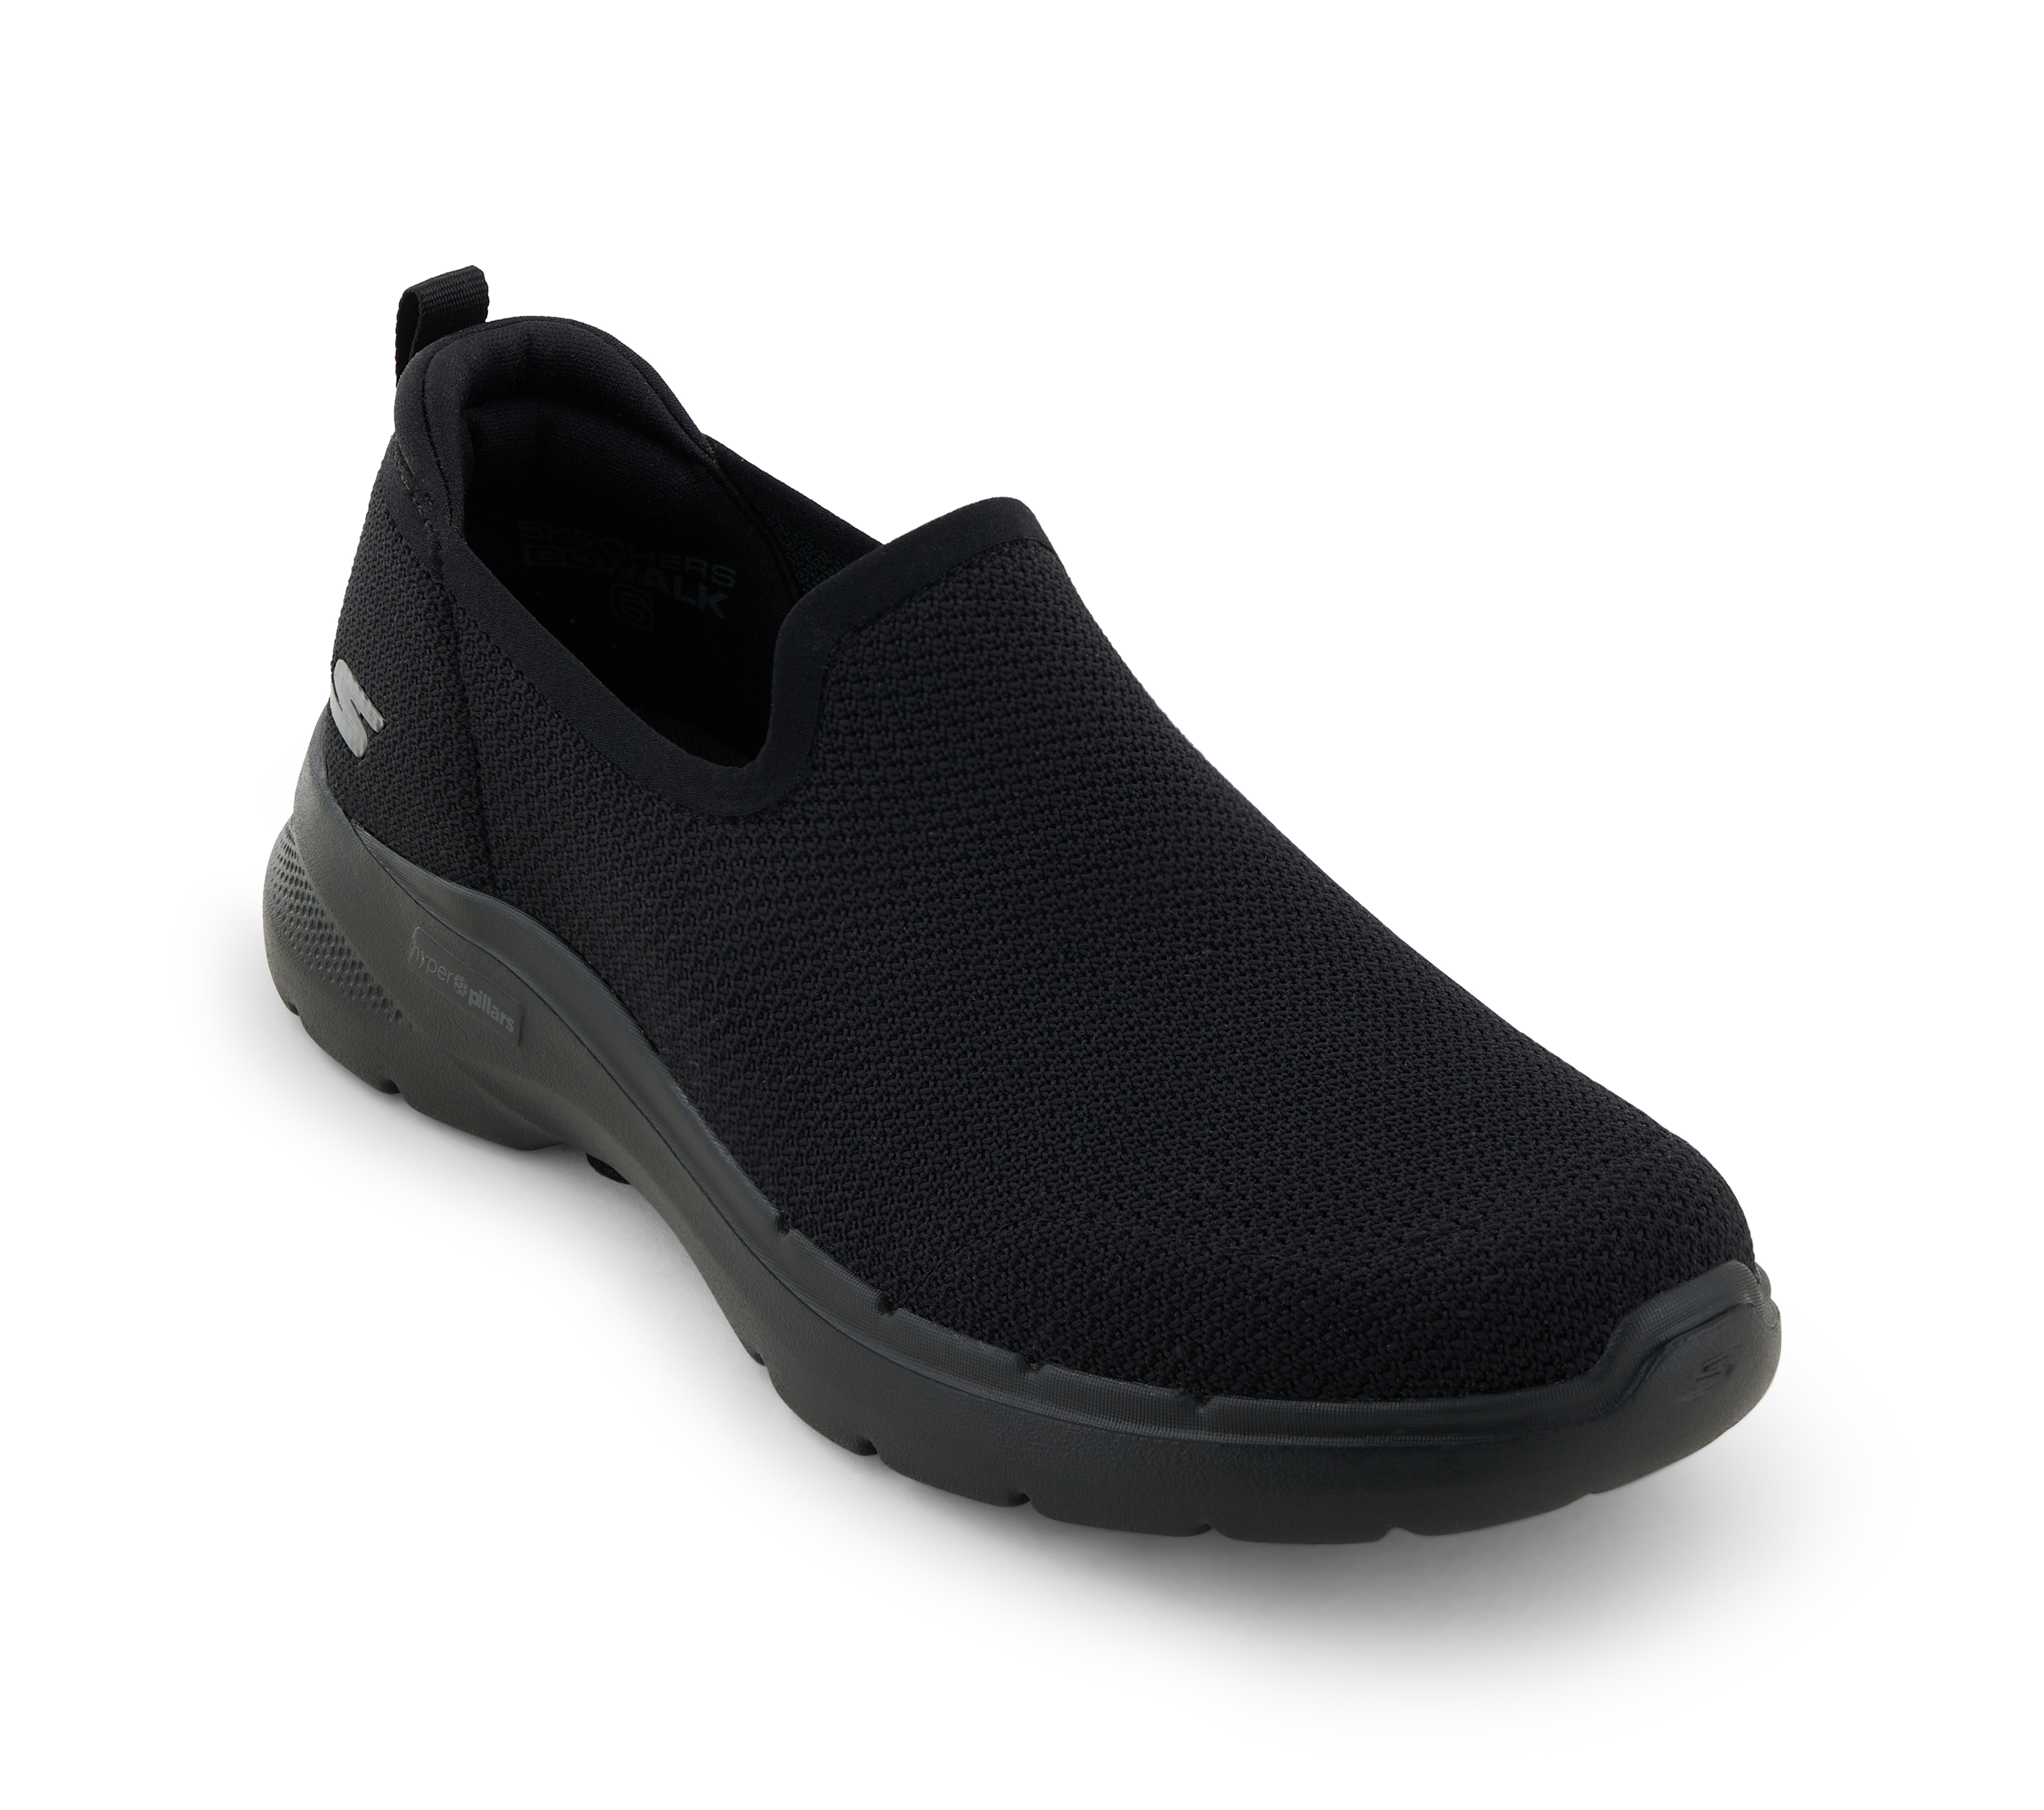 GO WALK 6 - FIRST CLASS, BBLACK Footwear Lateral View